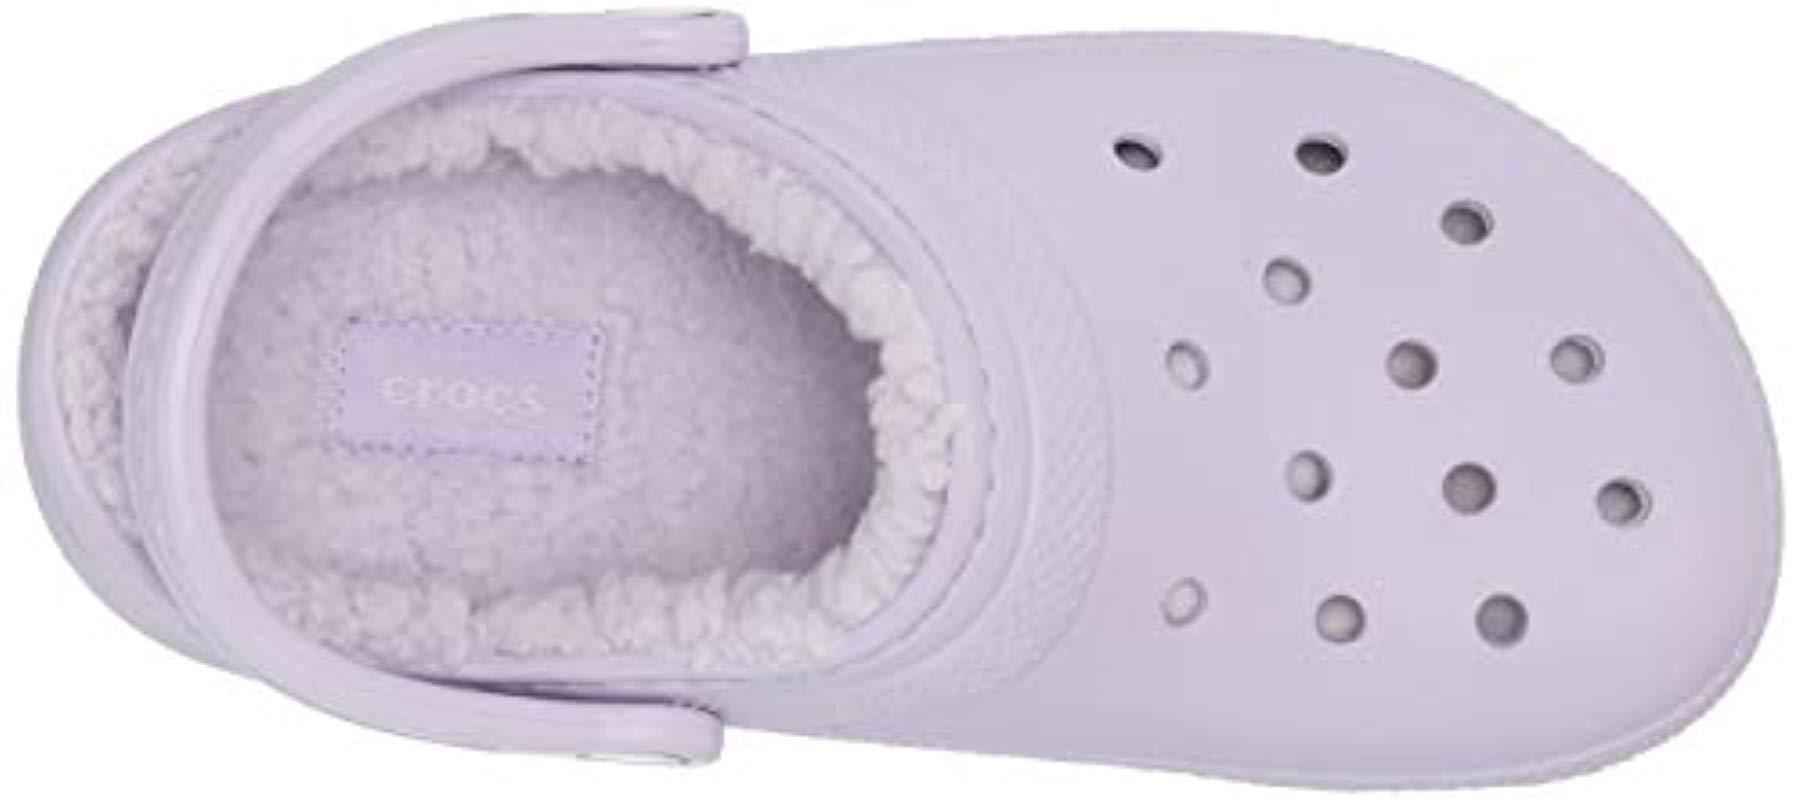 Crocs™ Unisex Adult Classic Lined | Warm And Fuzzy Slippers Clog in Purple  | Lyst